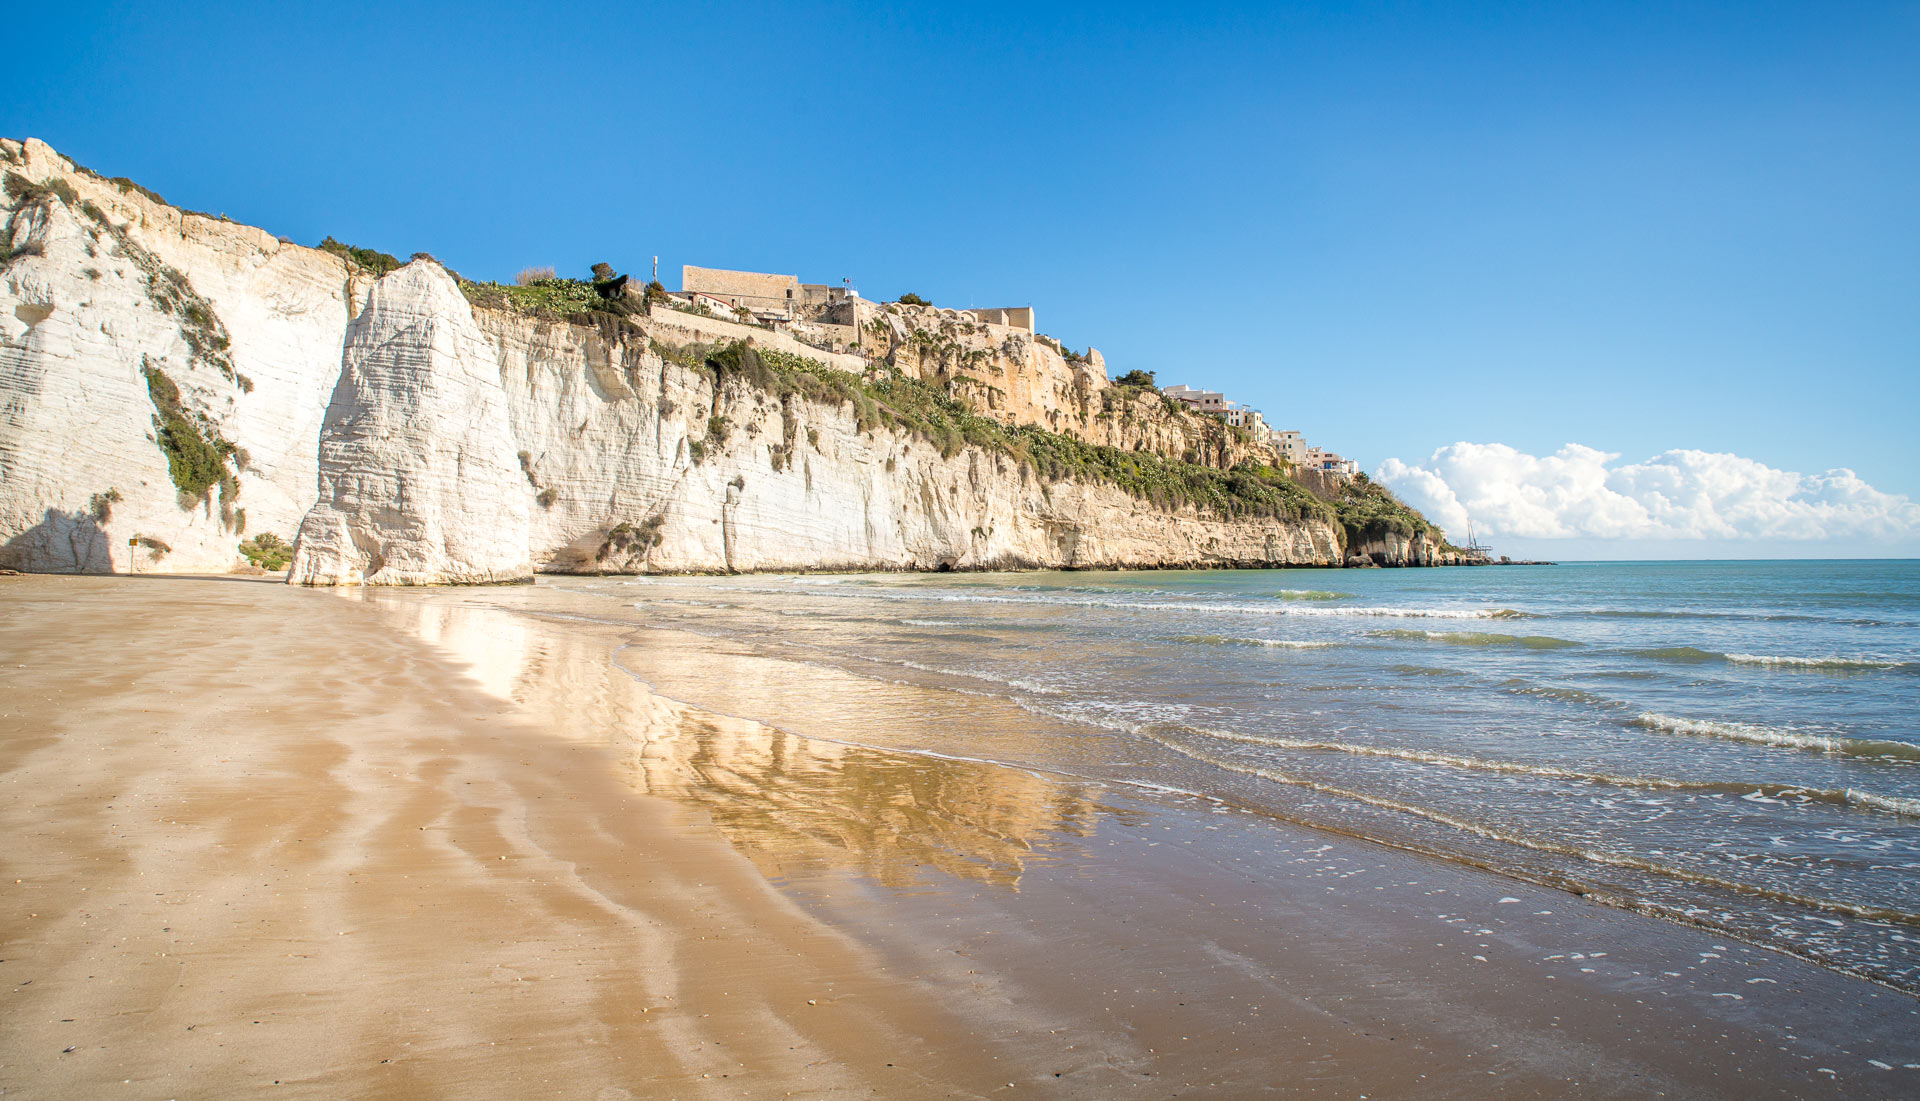 The beach of Vieste and the Pizzomunno, Gargano National Park